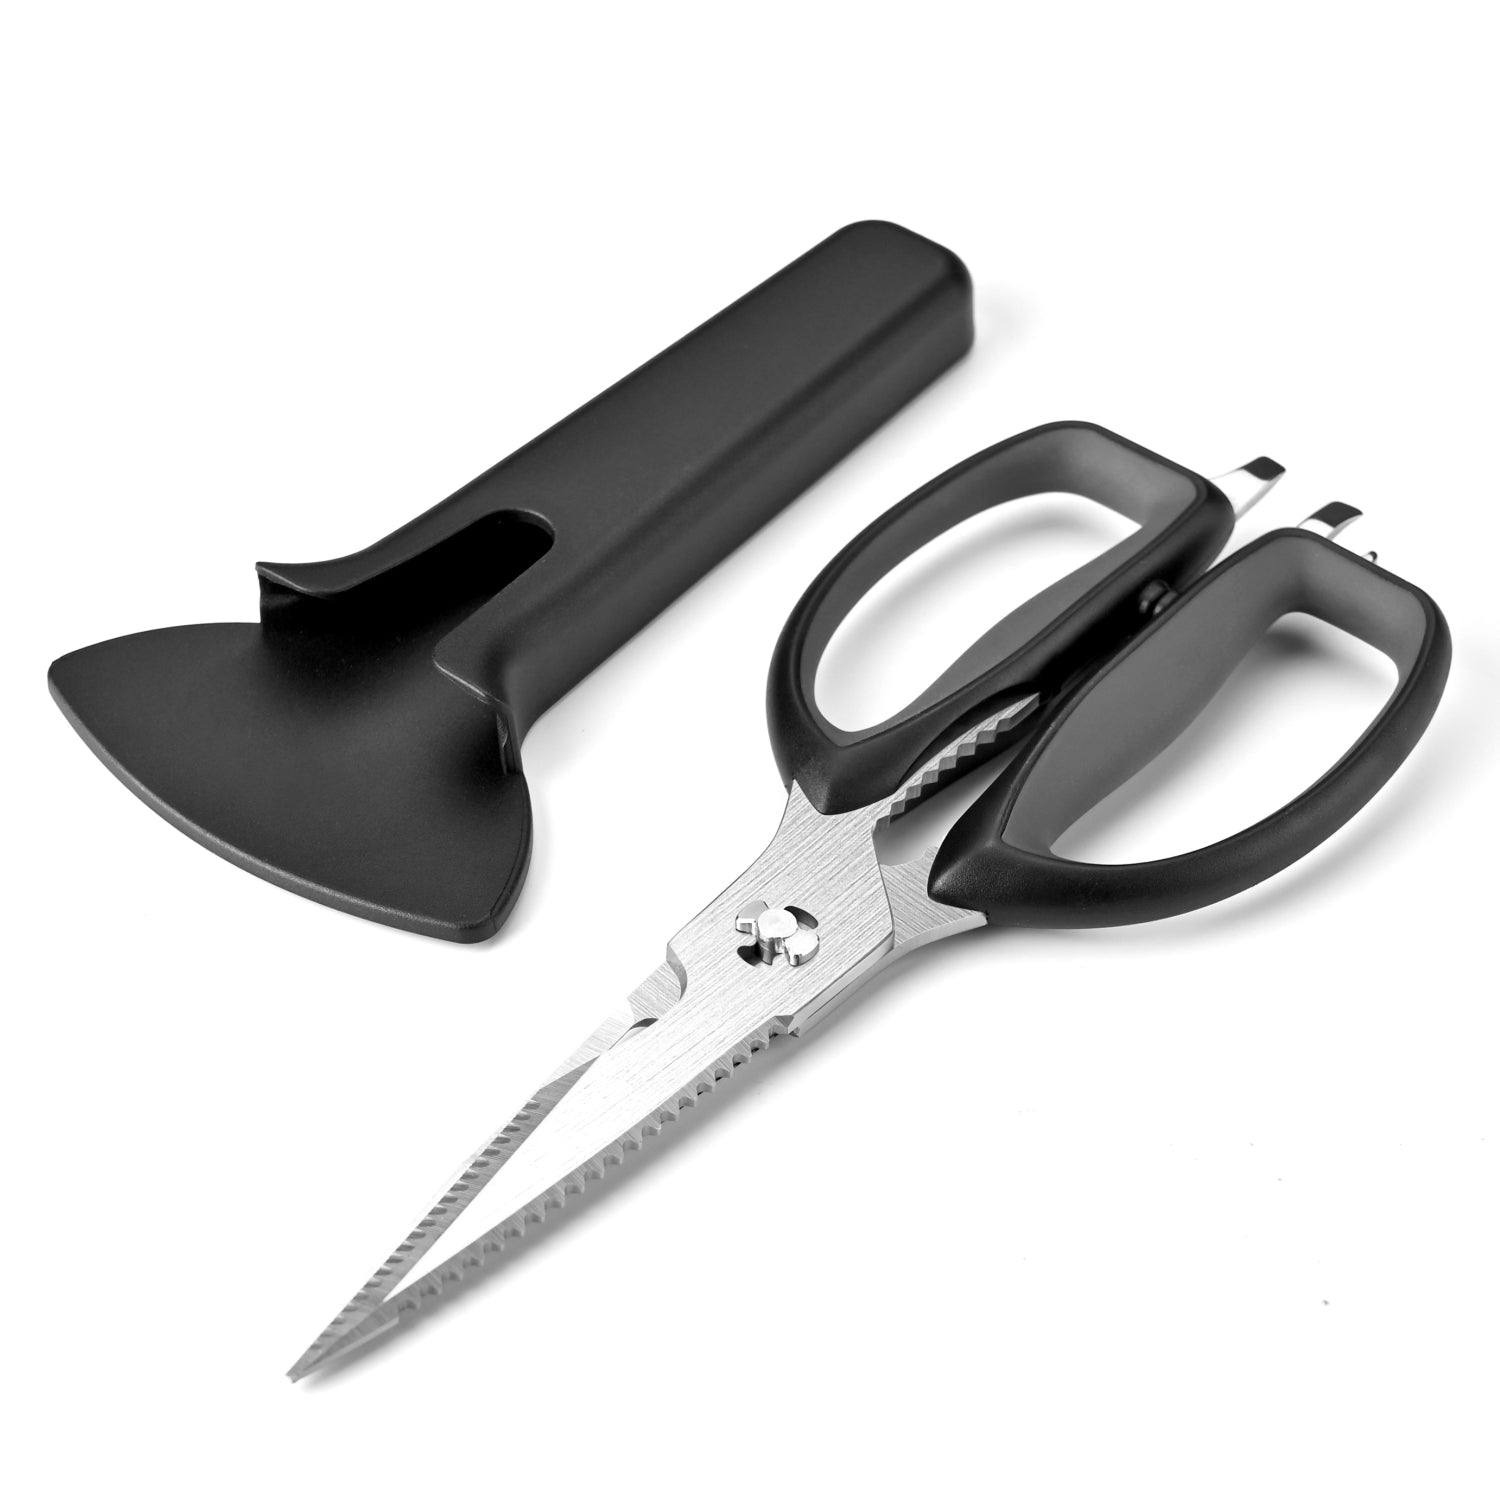 1 Set Of Multi-Purpose Heavy Duty Kitchen Scissors For Easy Cutting.  Perfect For Your Kitchen. Comes With Magnetic Holder For Convenient  Storage. Used For Cutting Chicken Bones, Fish, Walnuts, Vegetables, And  Other